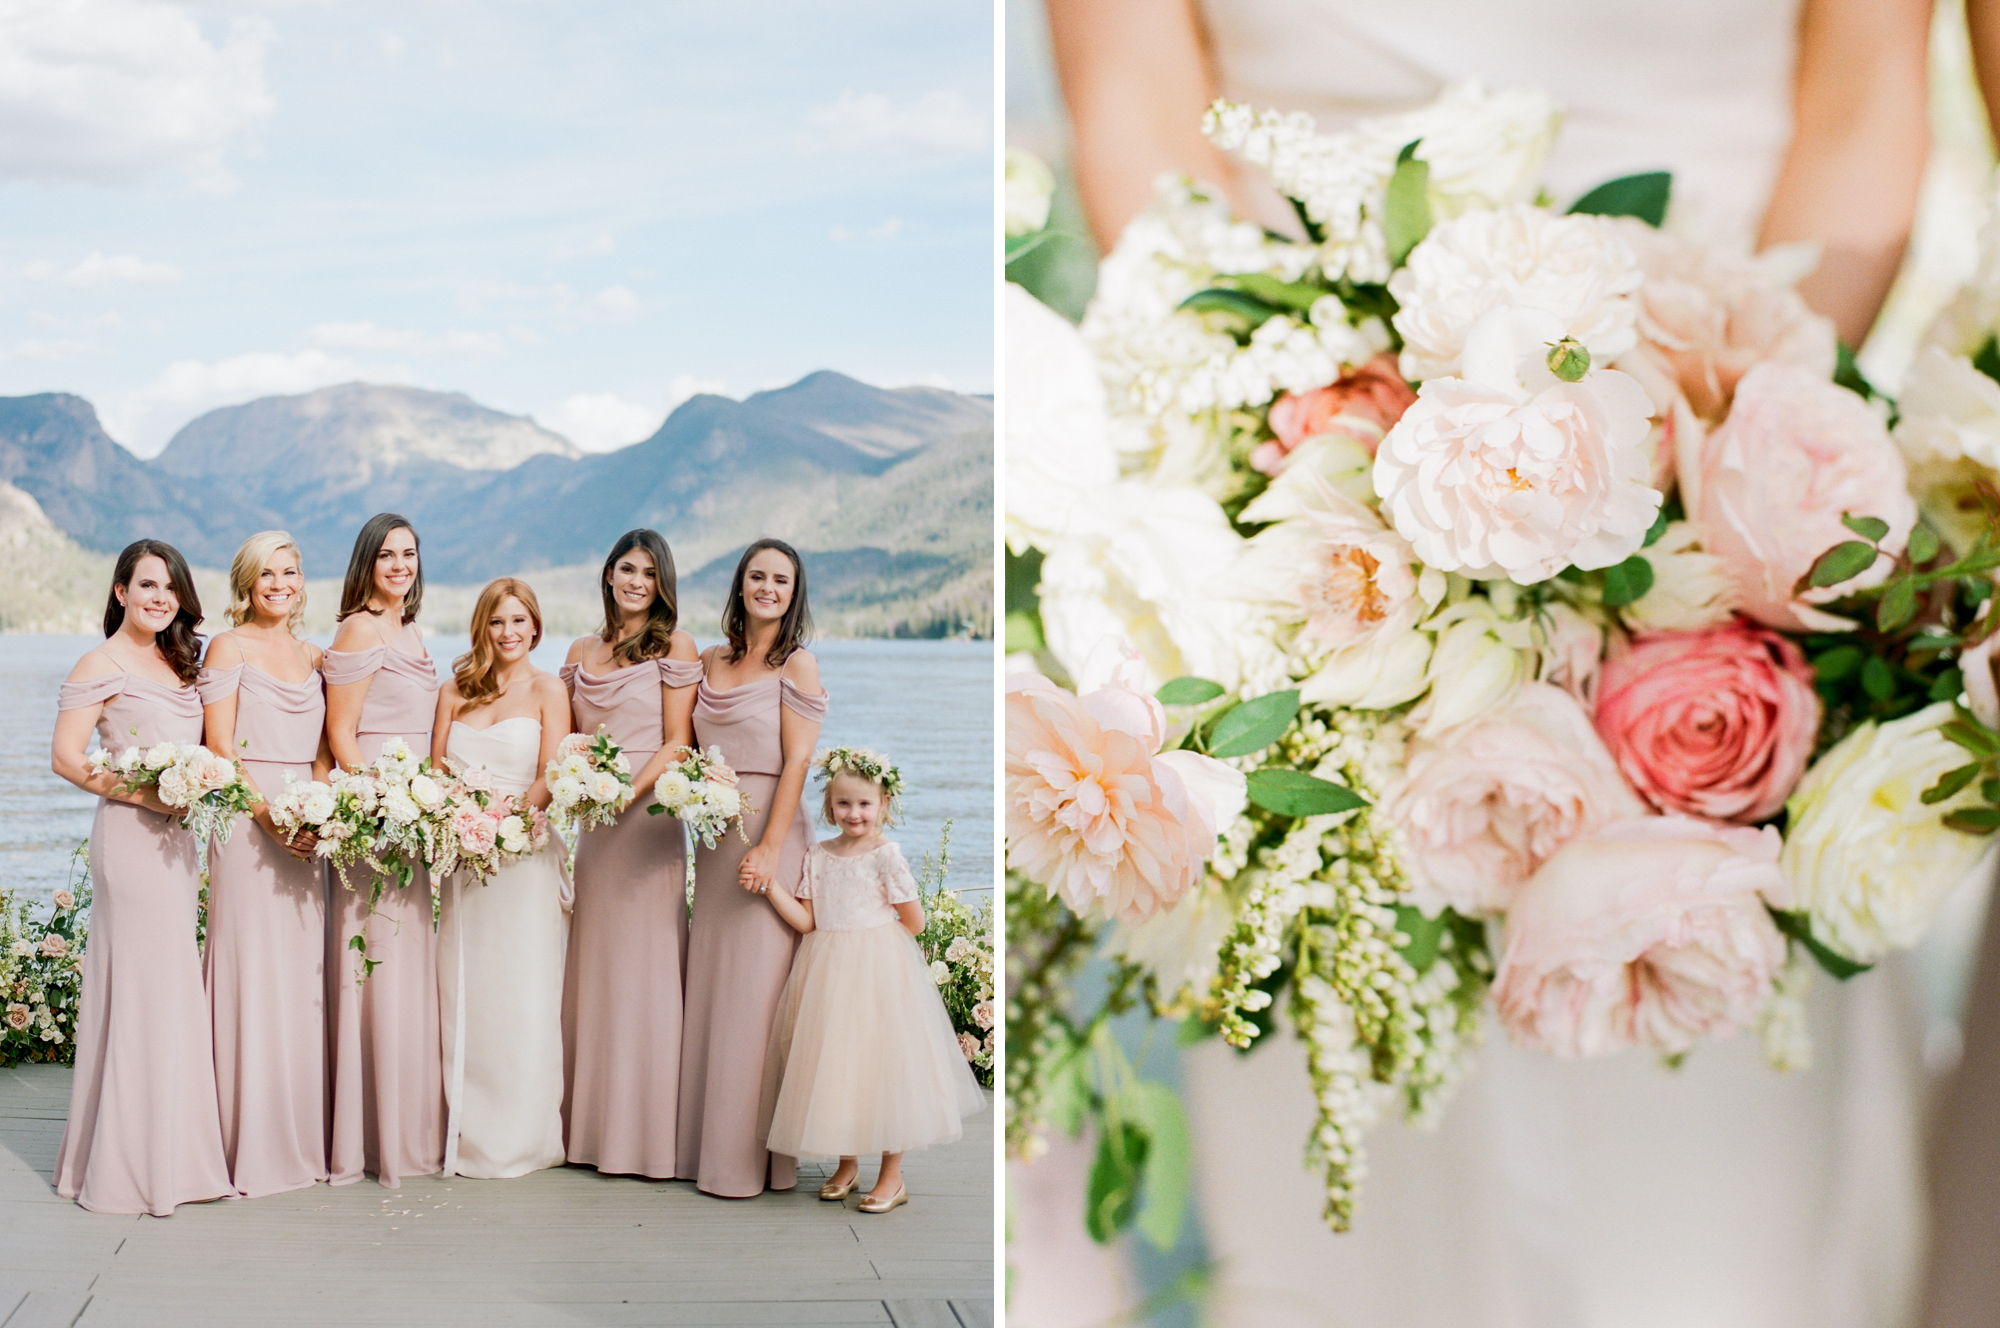 Grand Lake Wedding. Photo by Rachel Havel. Florals by Bows and Arrows